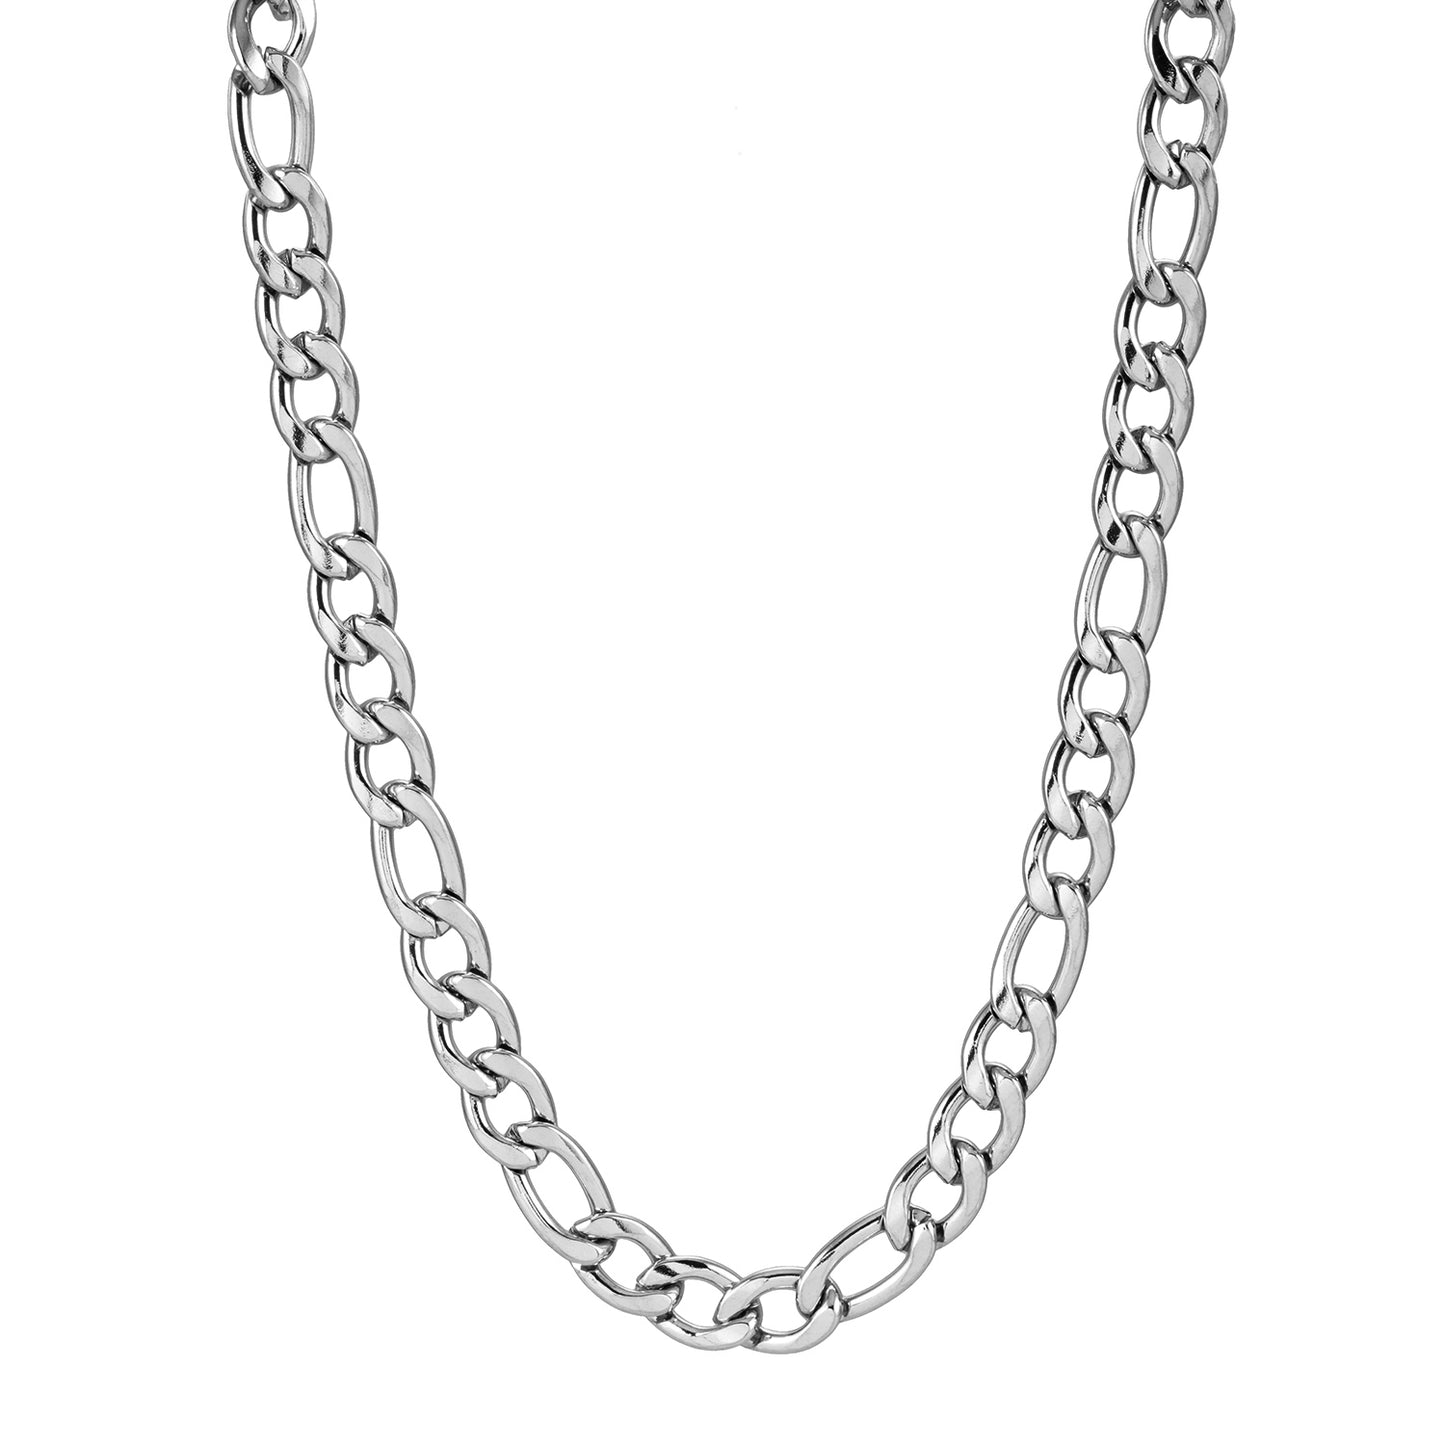 Style BROMLEY 6138: Cuban-Link Statement Chain Necklace in Silver.